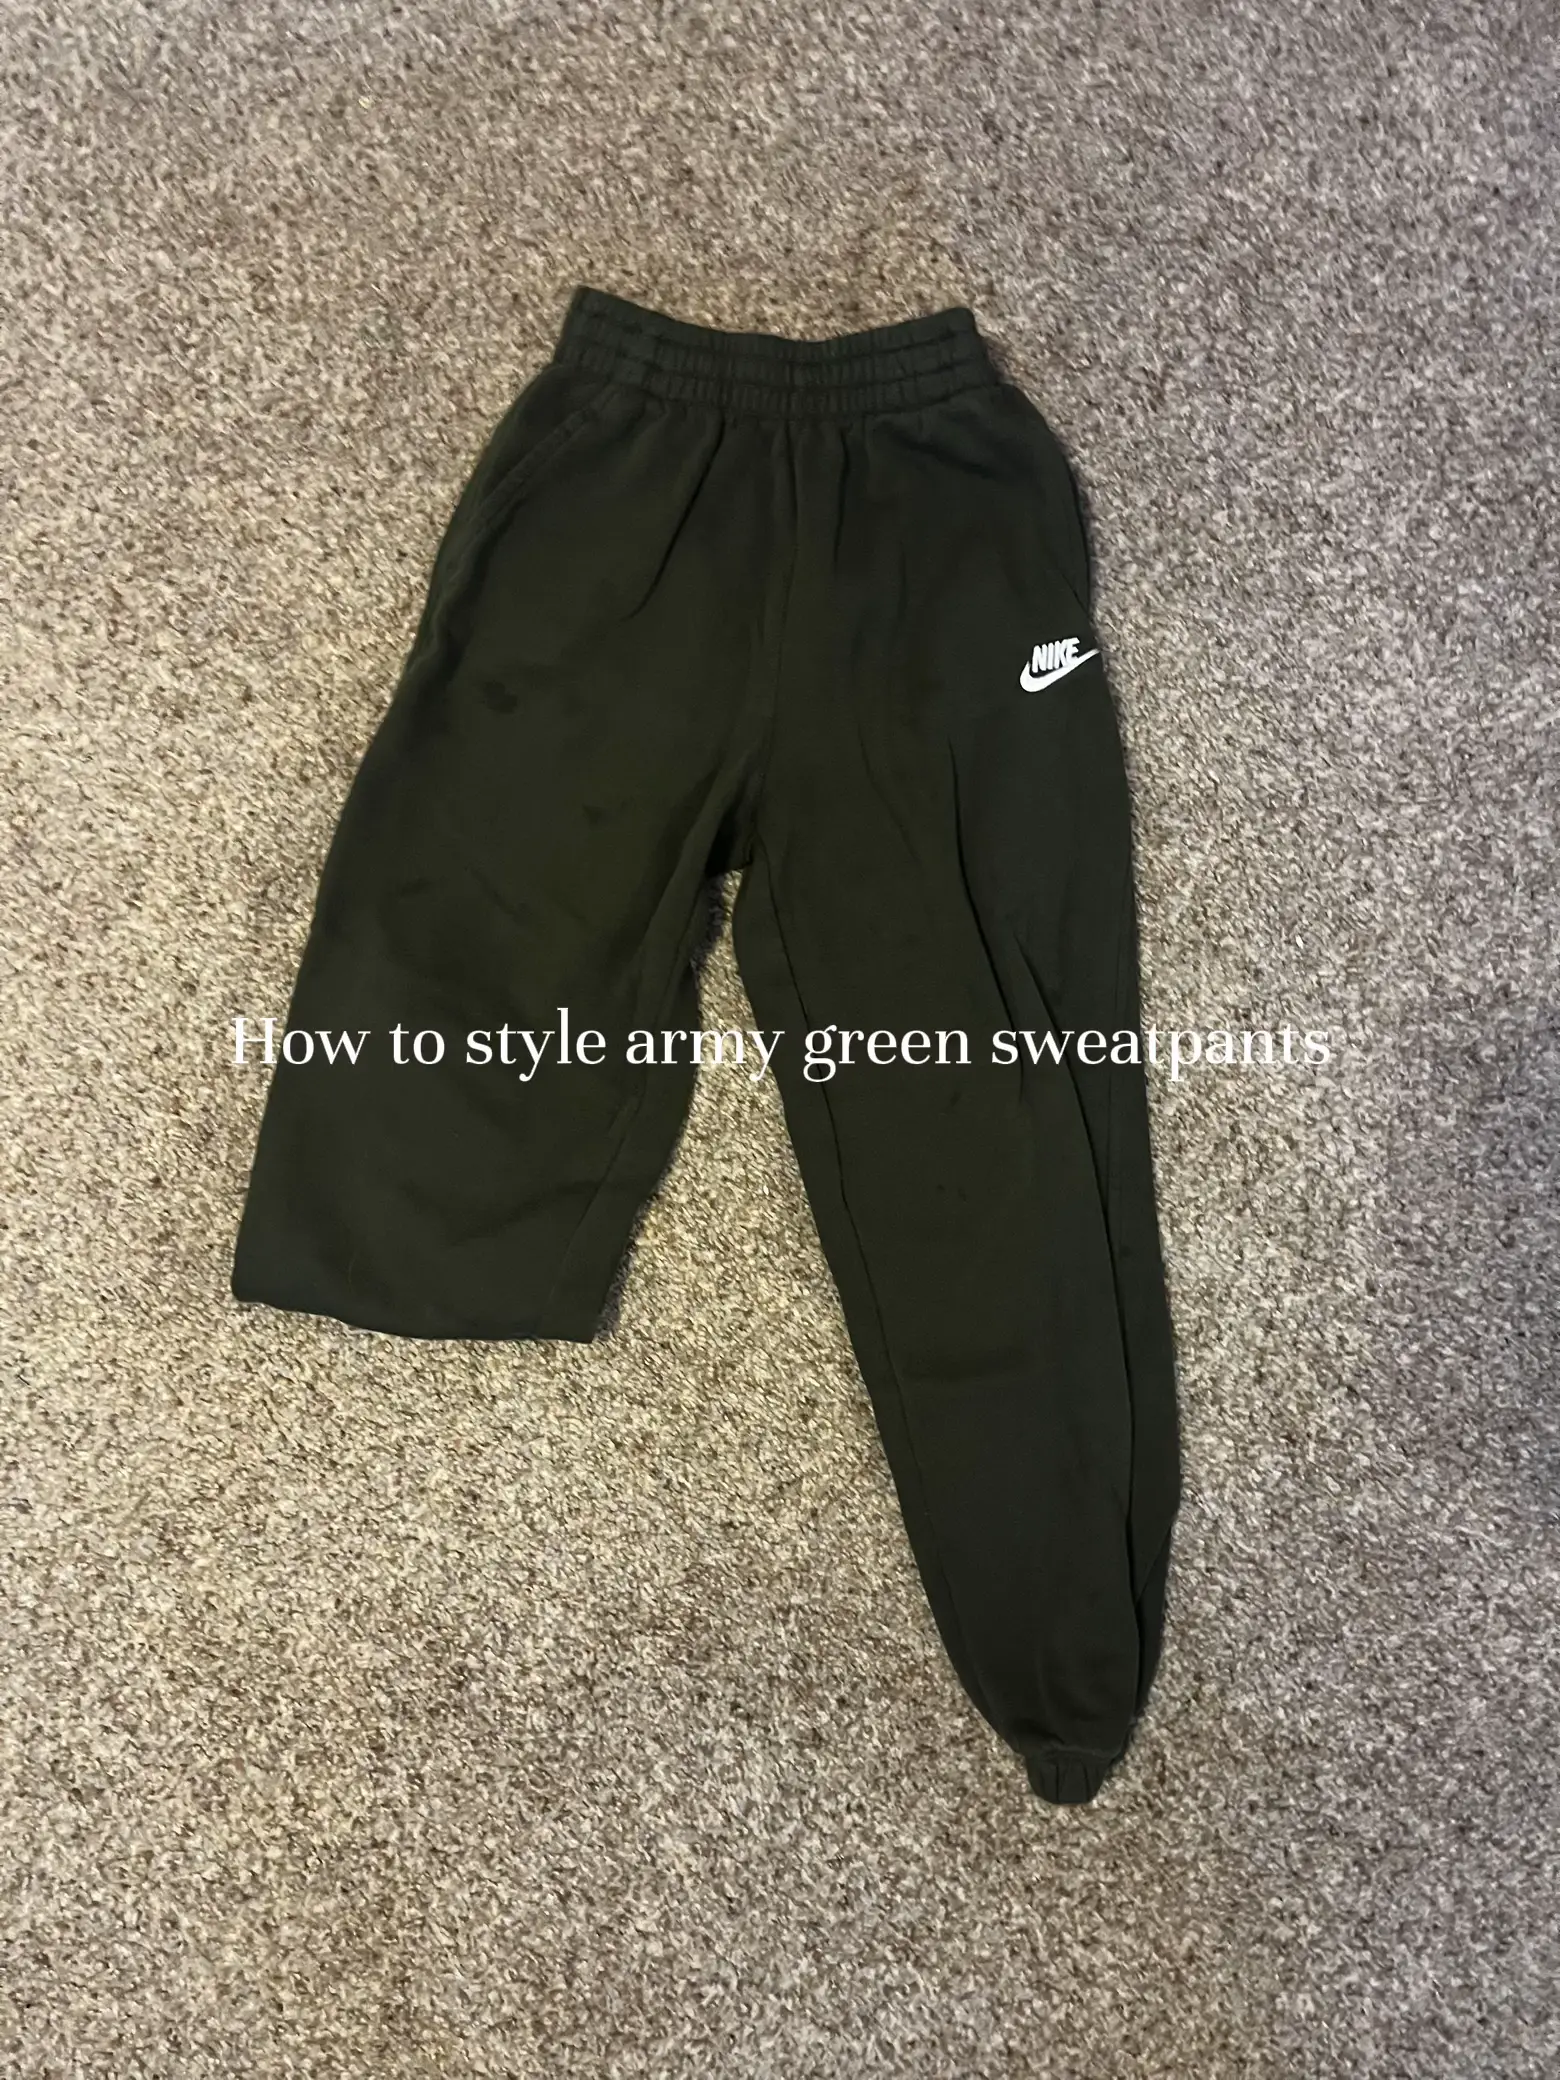 Replying to @nalanydasilva 3 easy ways on how to style black sweatpant